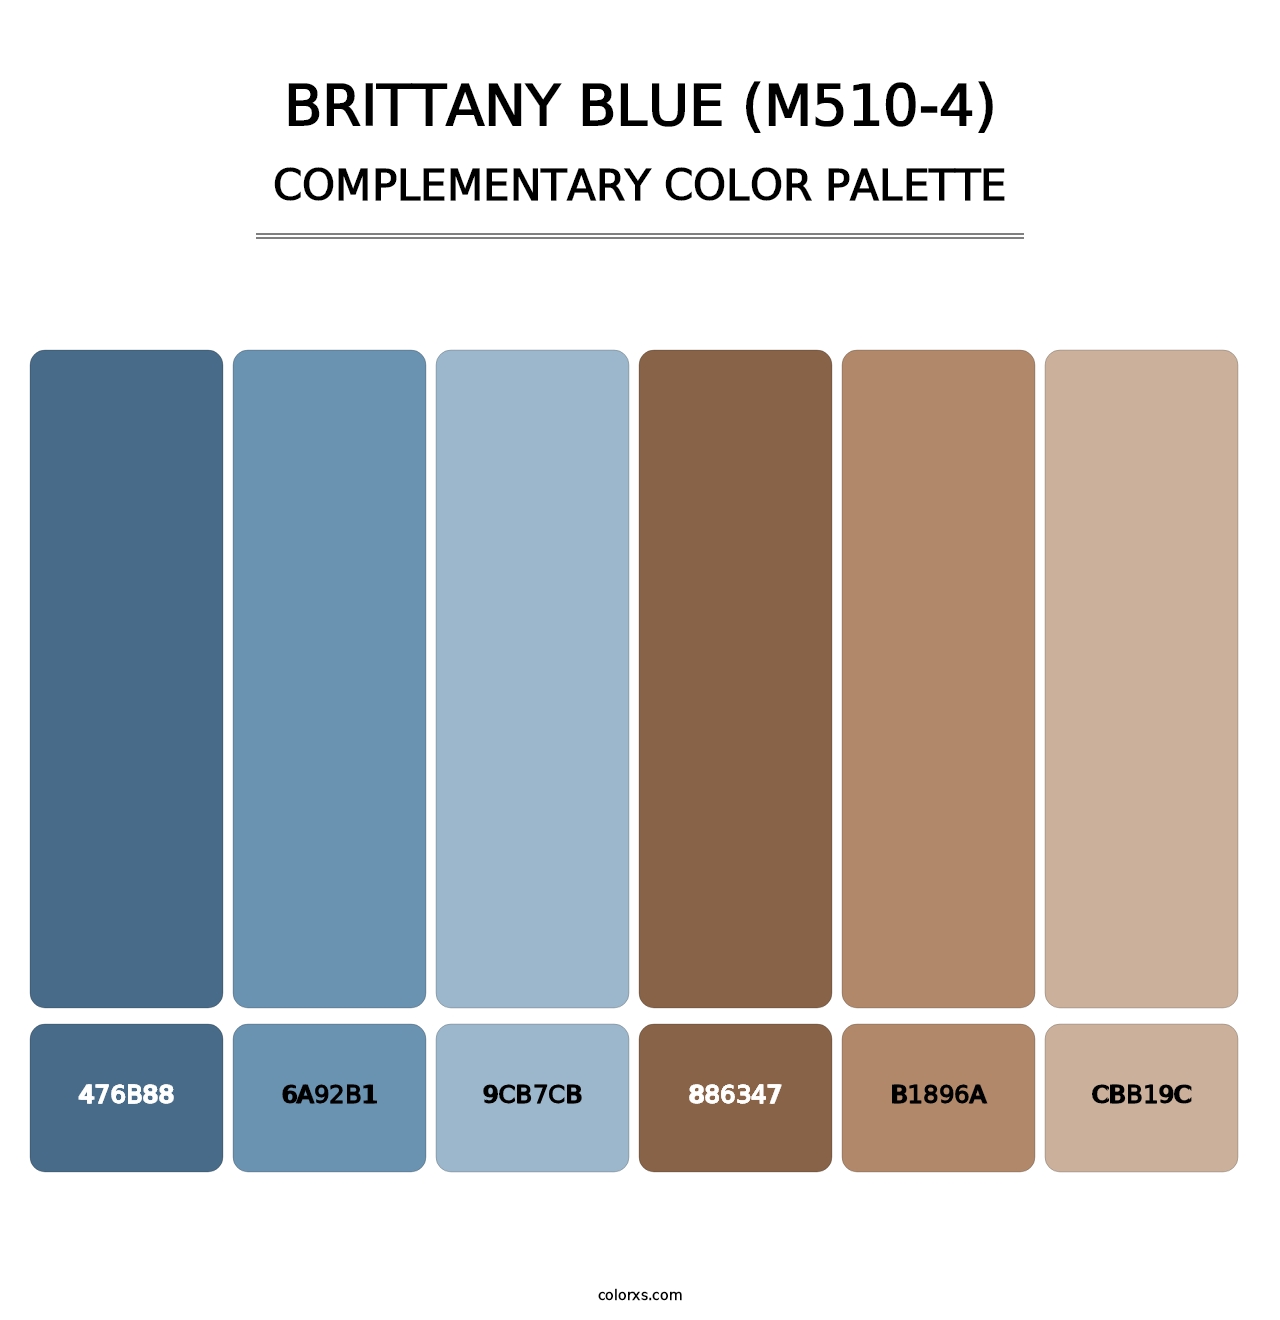 Brittany Blue (M510-4) - Complementary Color Palette